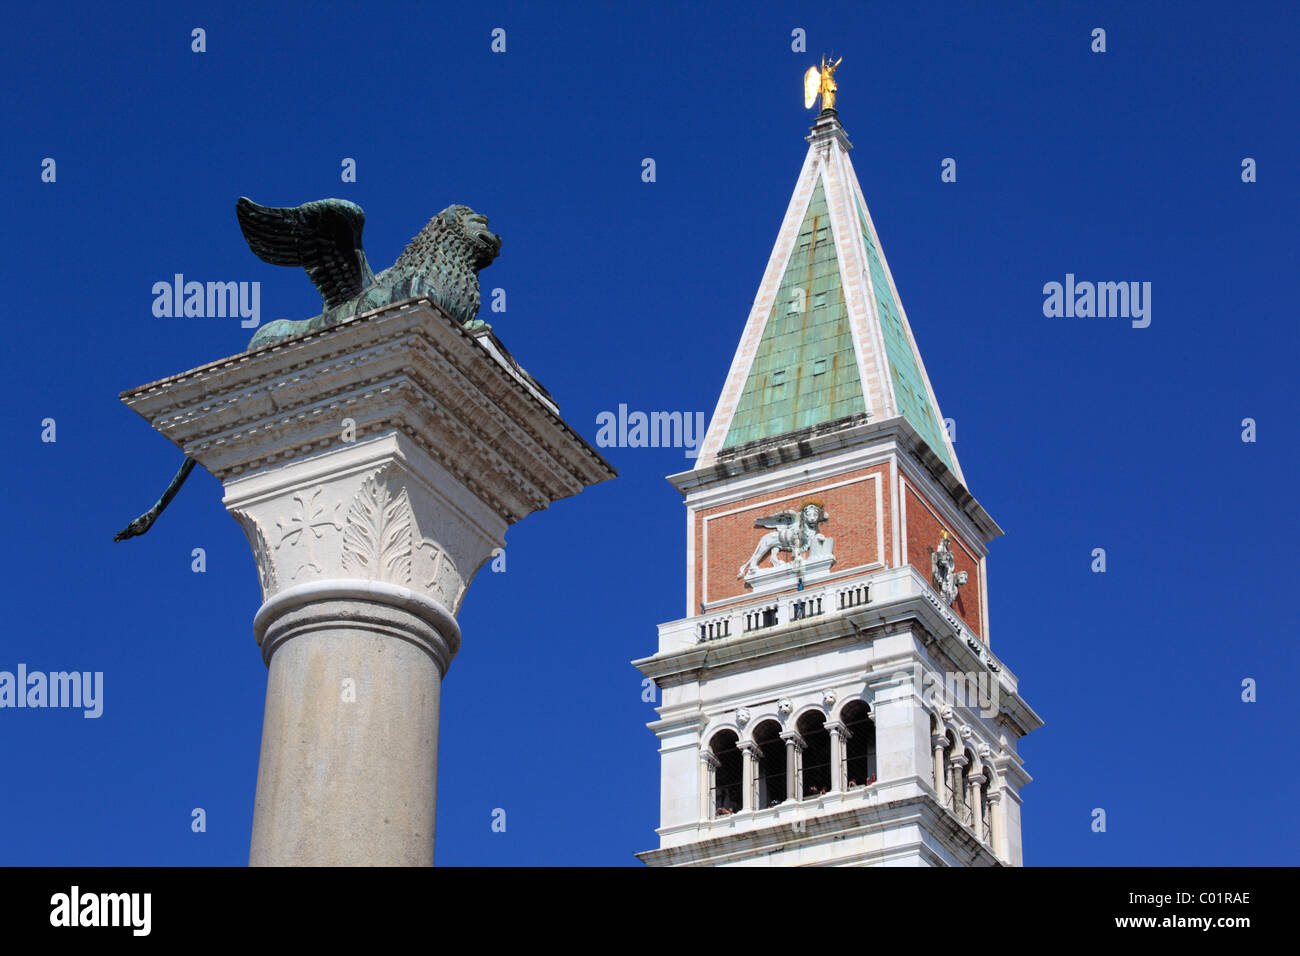 Lion of Saint Mark and Campanile belfry of the Basilica San Marco, Piazza San Marco or St. Mark's Square, Venice, Veneto, Italy Stock Photo